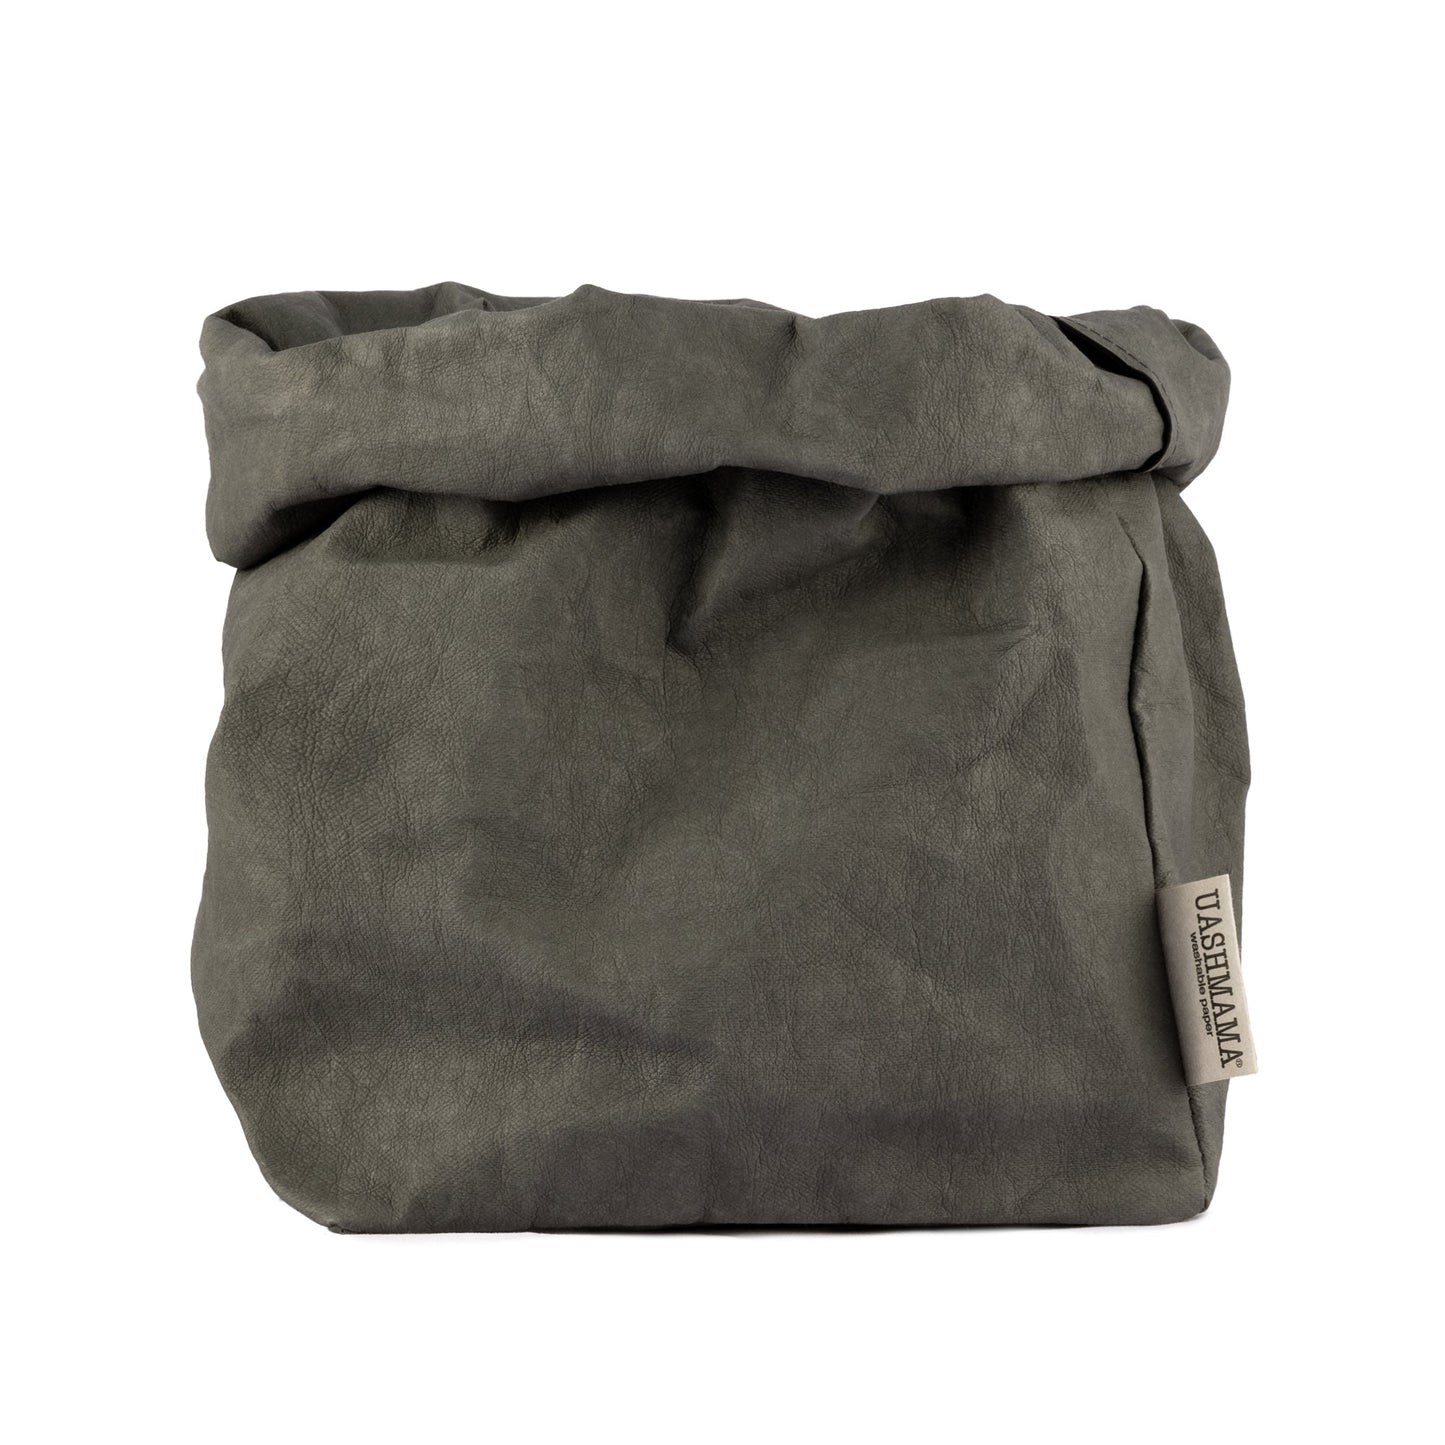 A washable paper bag is shown. The bag is rolled down at the top and features a UASHMAMA logo label on the bottom left corner. The bag pictured is the large plus size in dark grey.